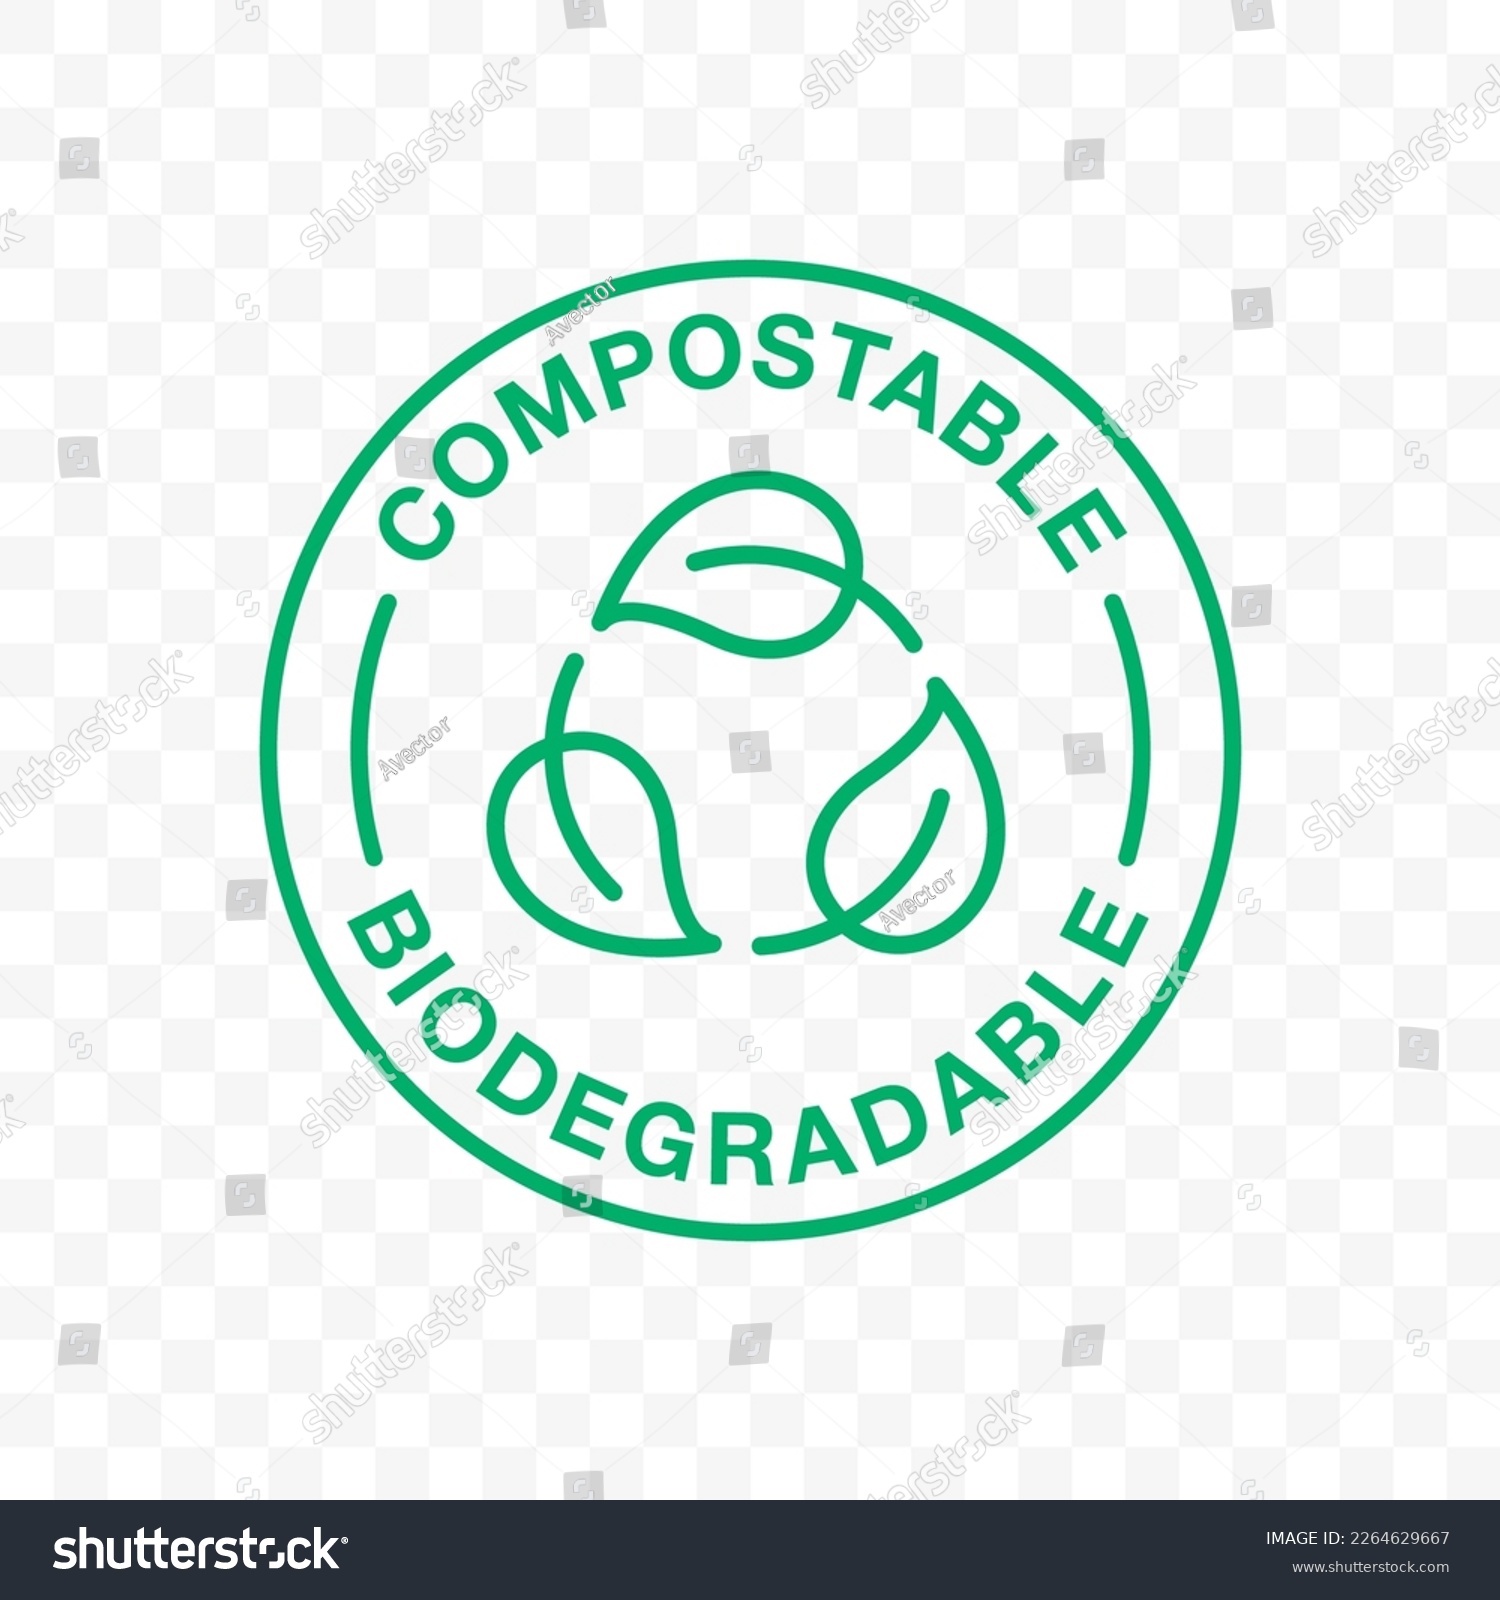 SVG of Biodegradable icon or compostable eco plastic, vector leaf label. Bio degradable stamp, green recycle circle symbol, for eco friendly organic and recyclable packs svg